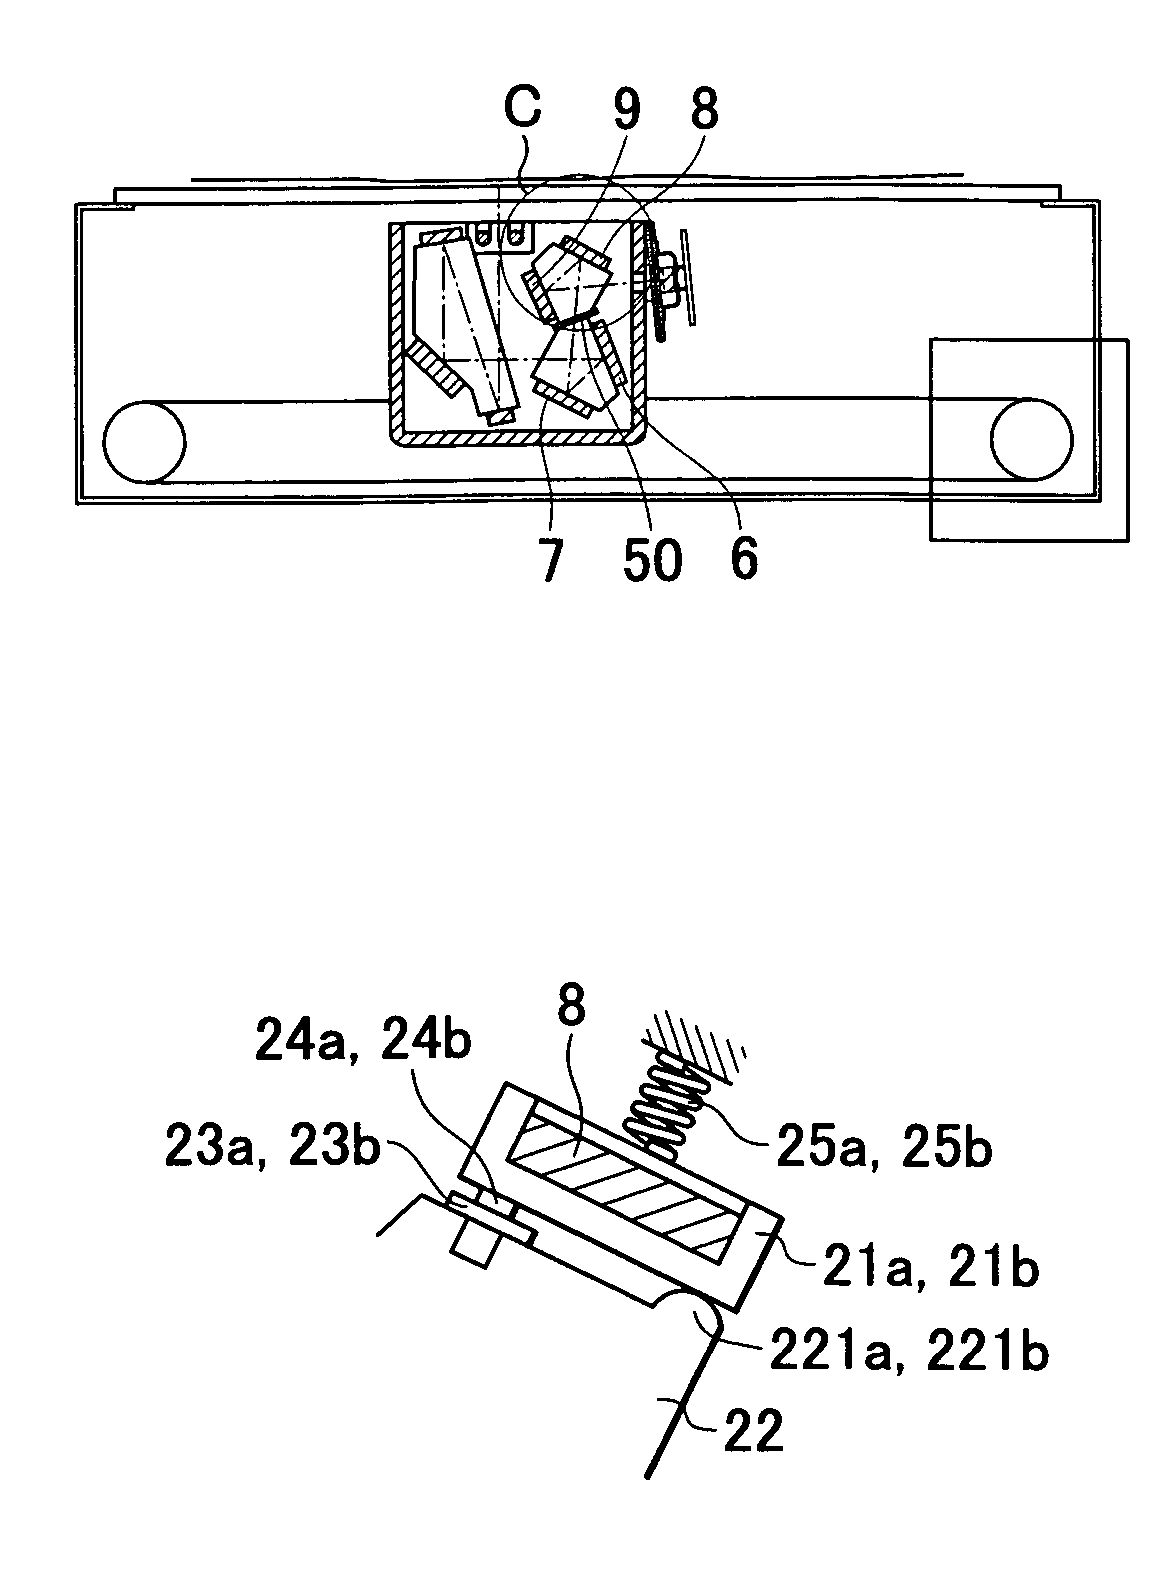 Image reader using off-axial optical system for imaging optical system